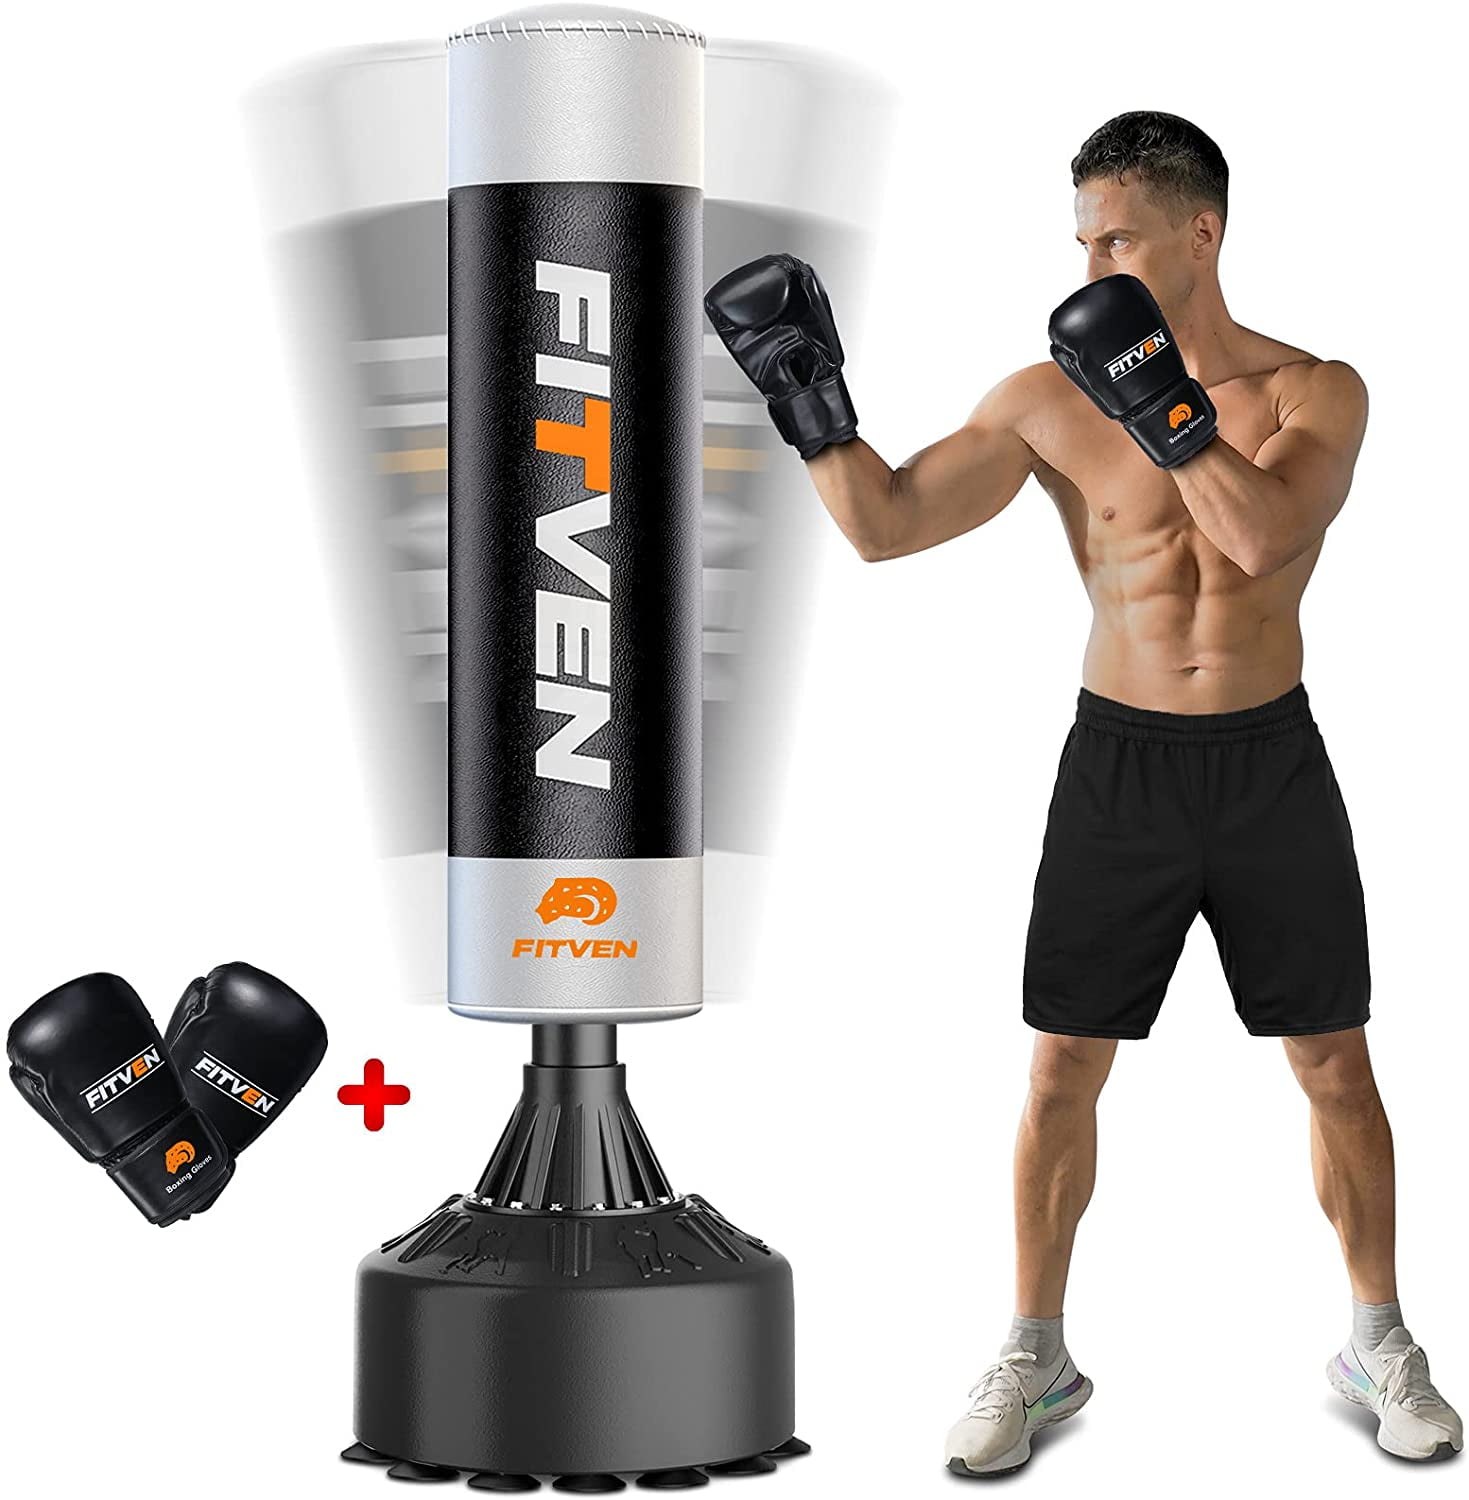 SMALL Boxing Heavy Punching Bag 18x15" EMPTY MMA Boxing Fight Training Tool 